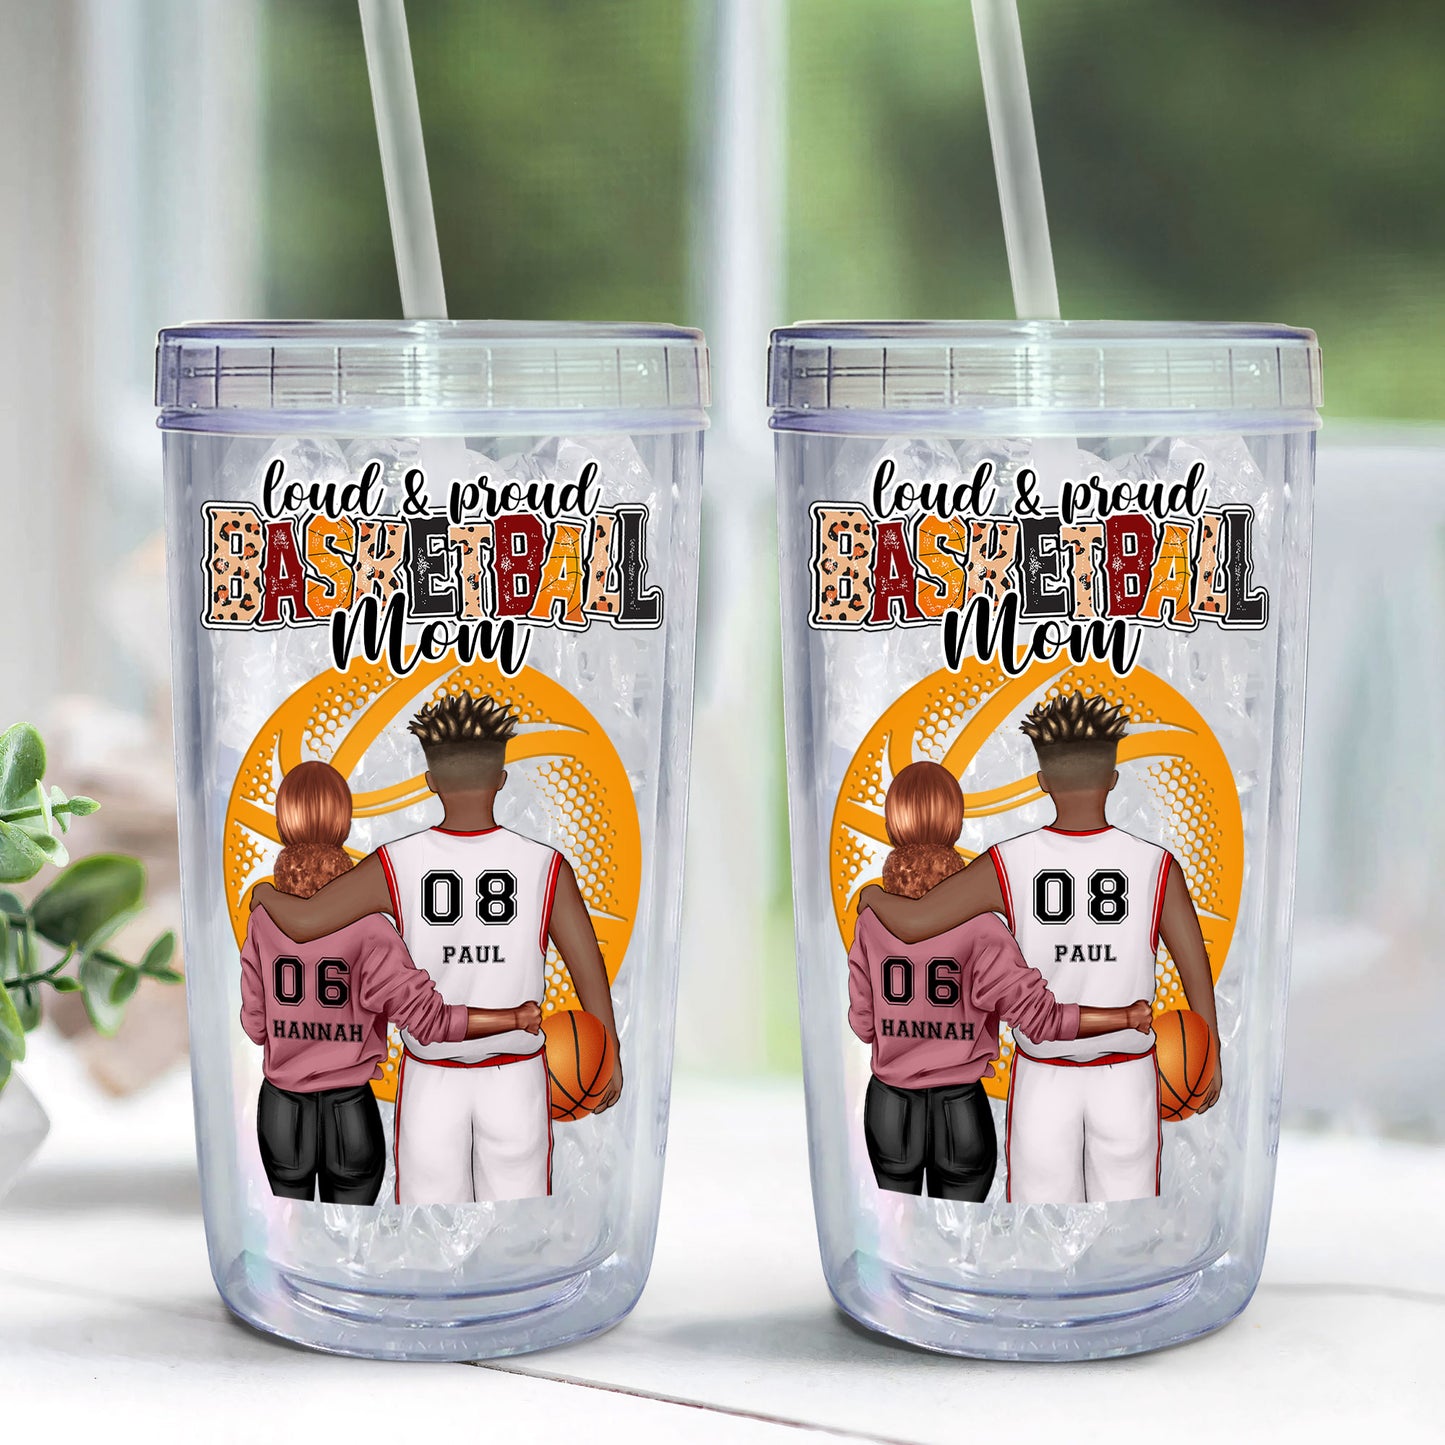 Loud & Proud Basketball Mom - Personalized Acrylic Insulated Tumbler With Straw